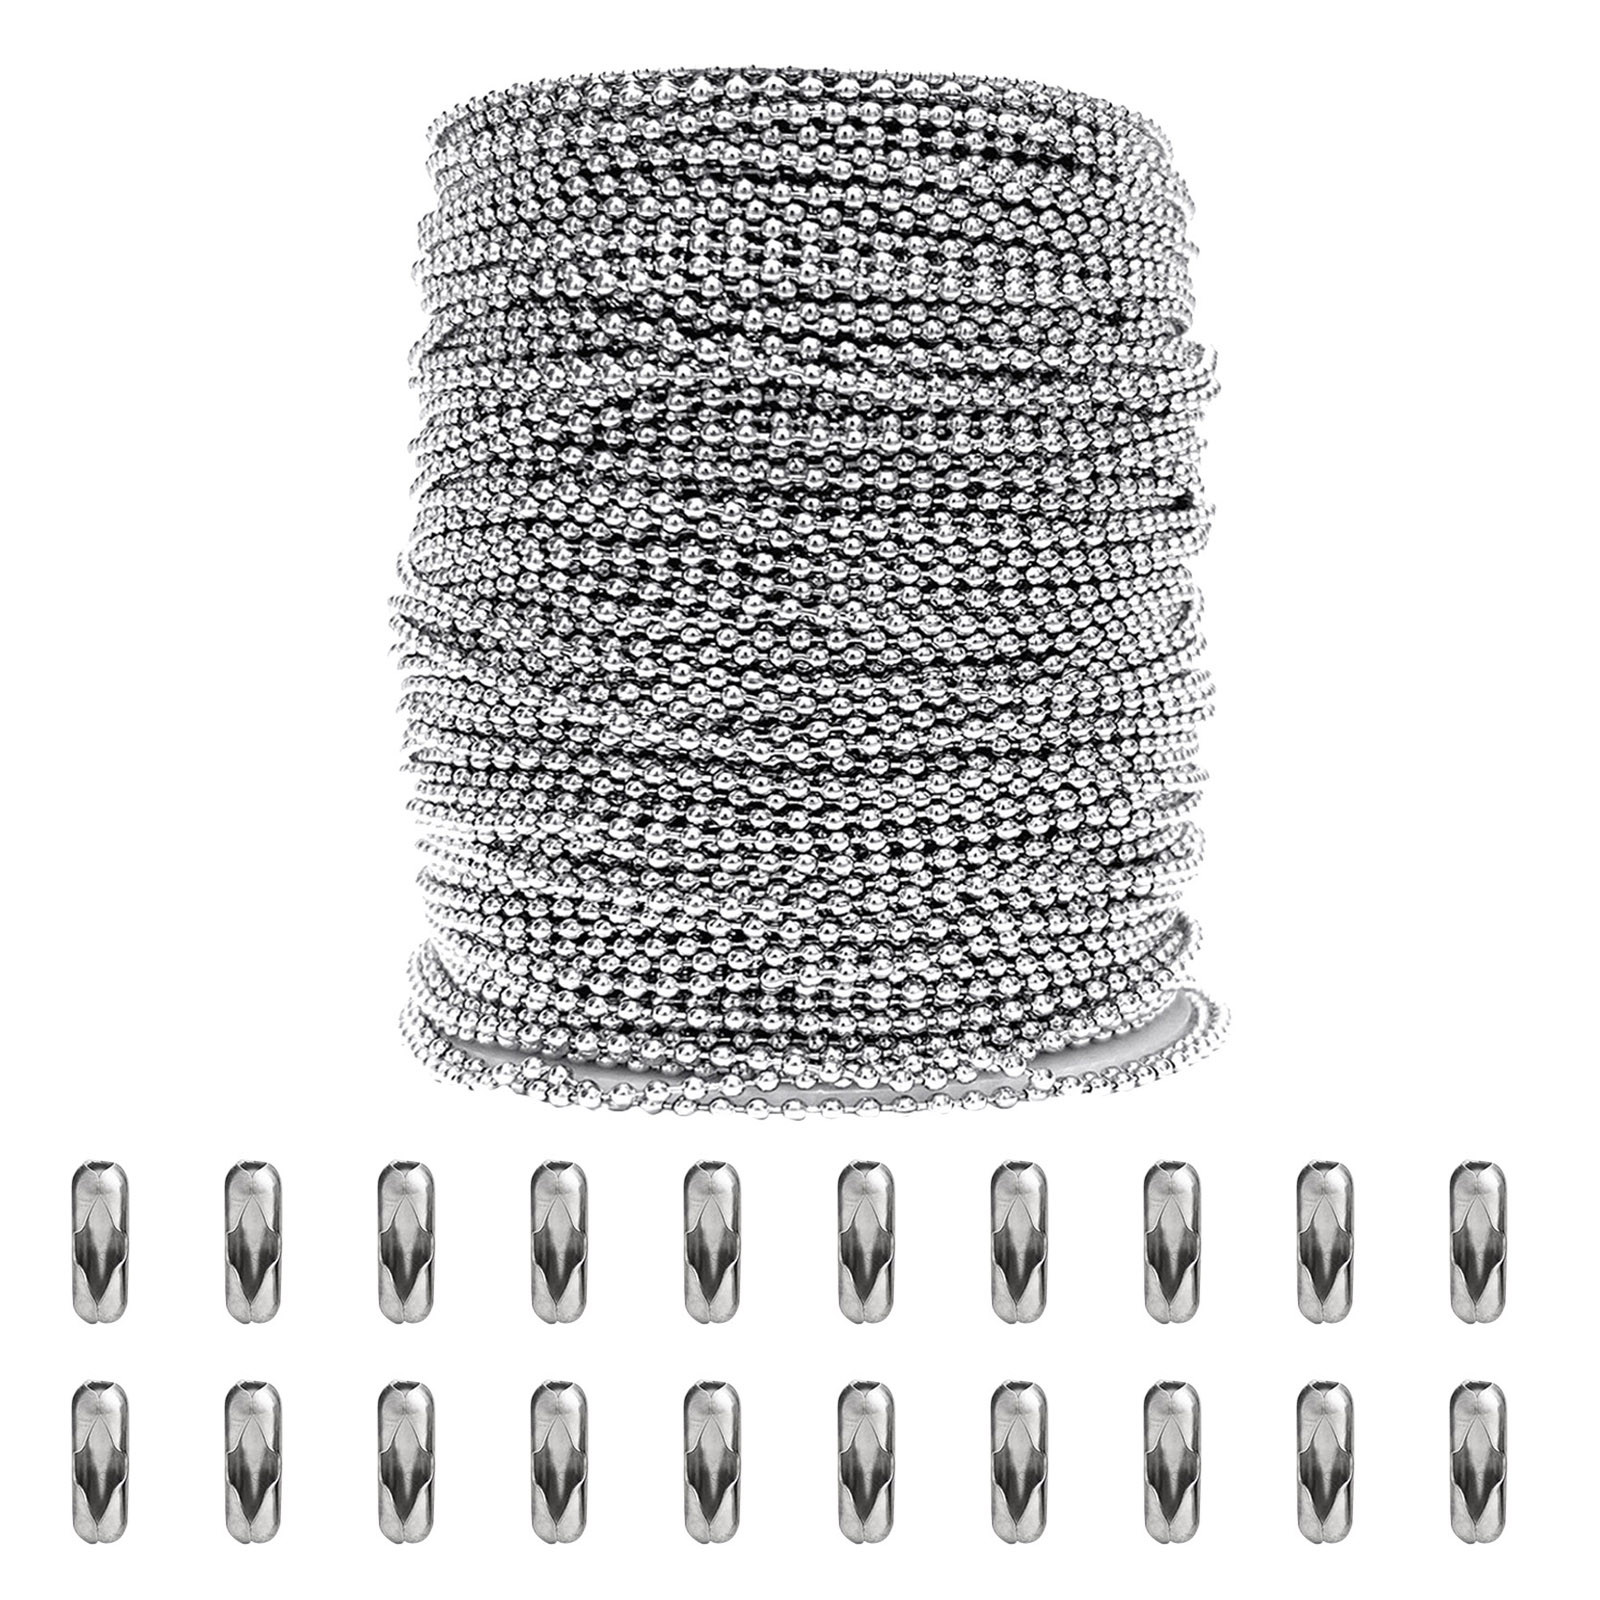 duhgbne ball bead chain stainless steel 33ft/10m beaded dog chain necklace  chains for jewelry making diy crafts silver metal small bead chain roll  with 20pcs 